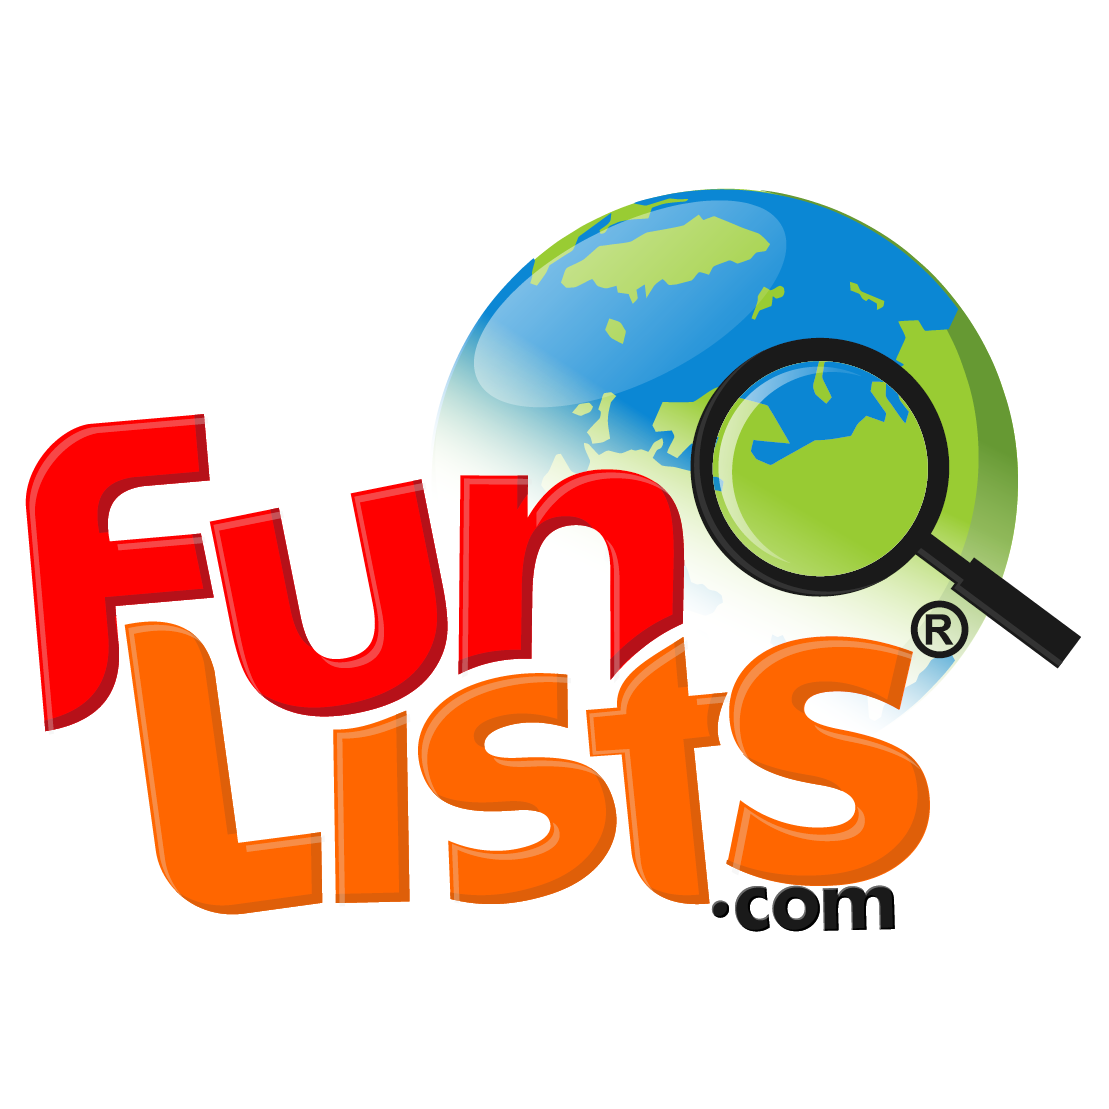 find #fun things to do in #VictoriaBC 
#YYJ events, activities & venues.
#FunLists #YourFunStartsHere